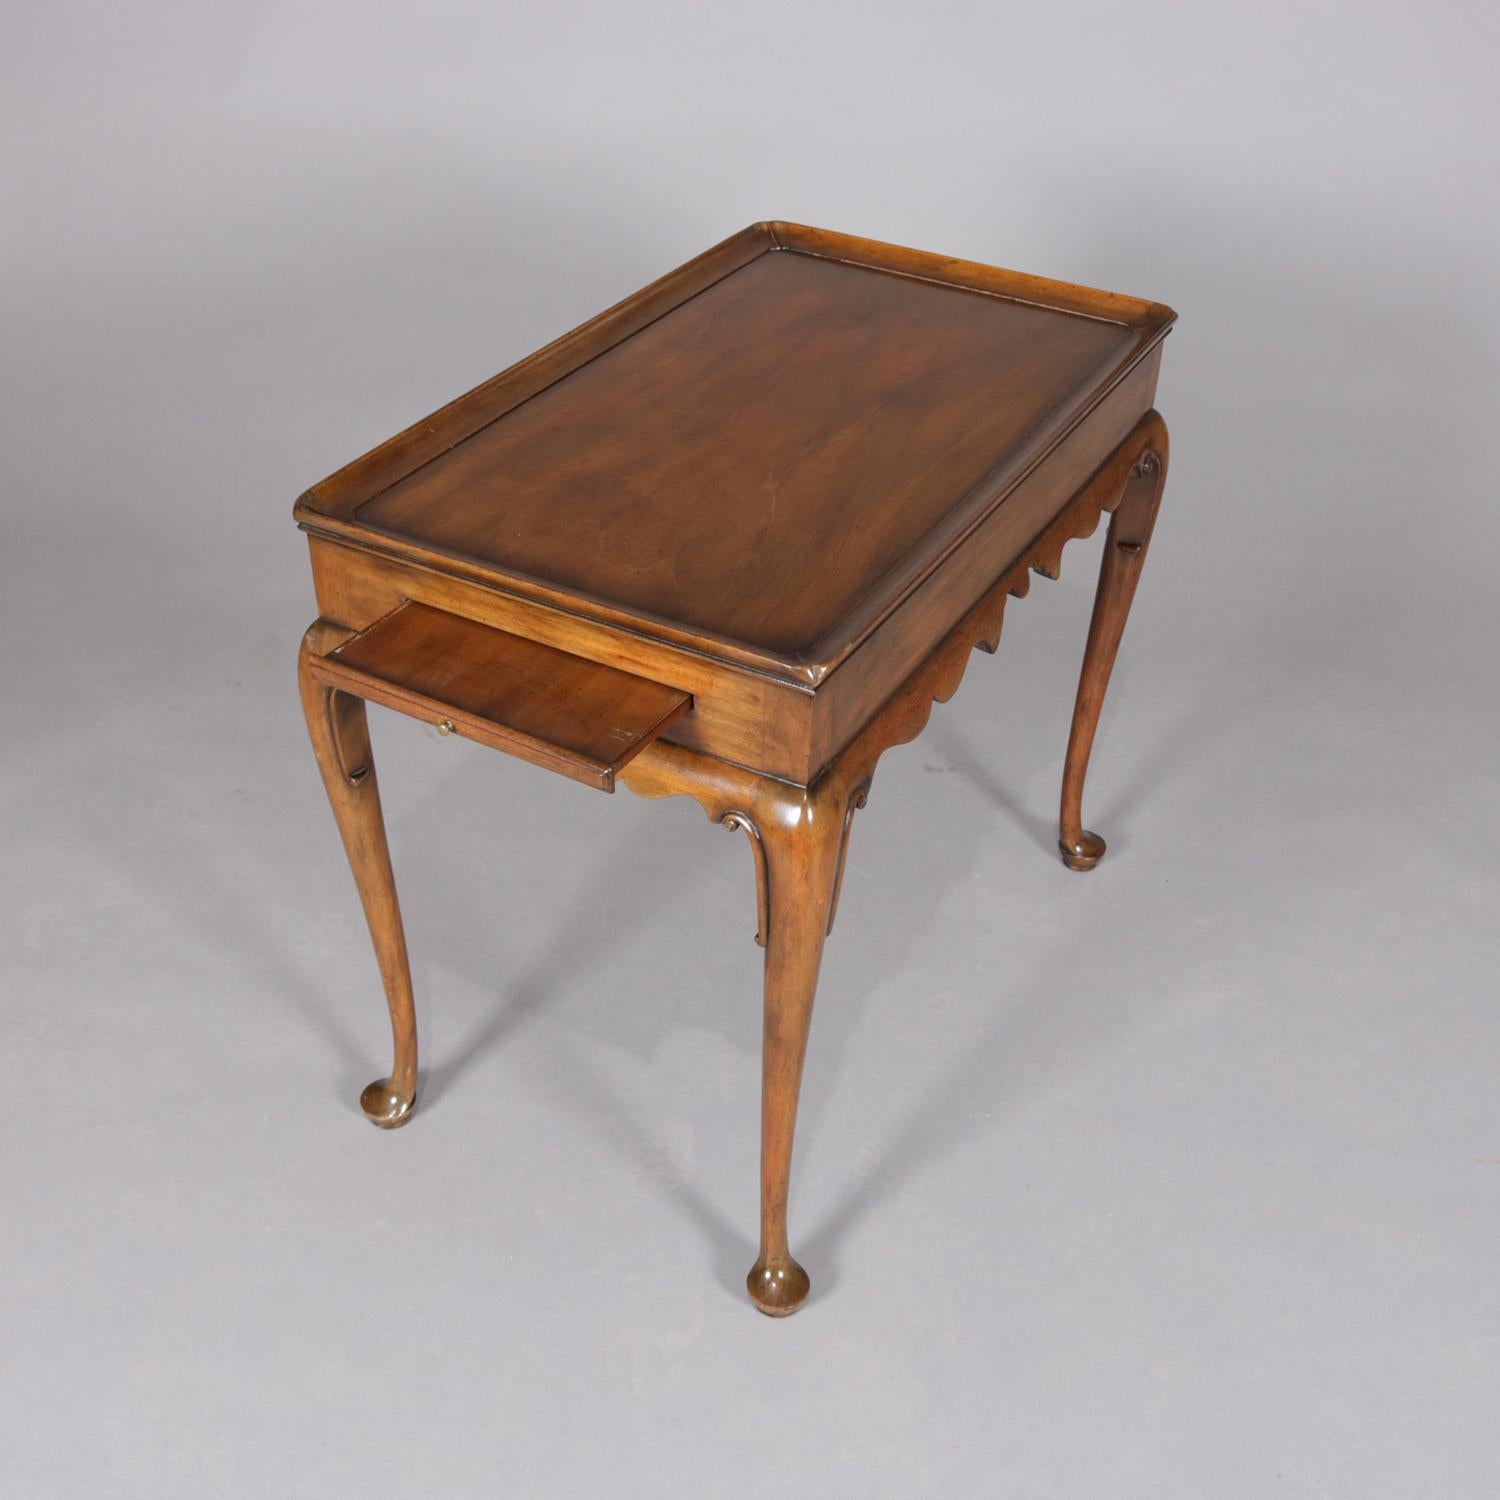 A carved mahogany Williamsburg tea table by Kittinger features top with full surround lip, pullout / pull-out side slide trays, scalloped skirt, and raised on cabriole legs terminating in pad feet, signed on base, 20th century.

***DELIVERY NOTICE –